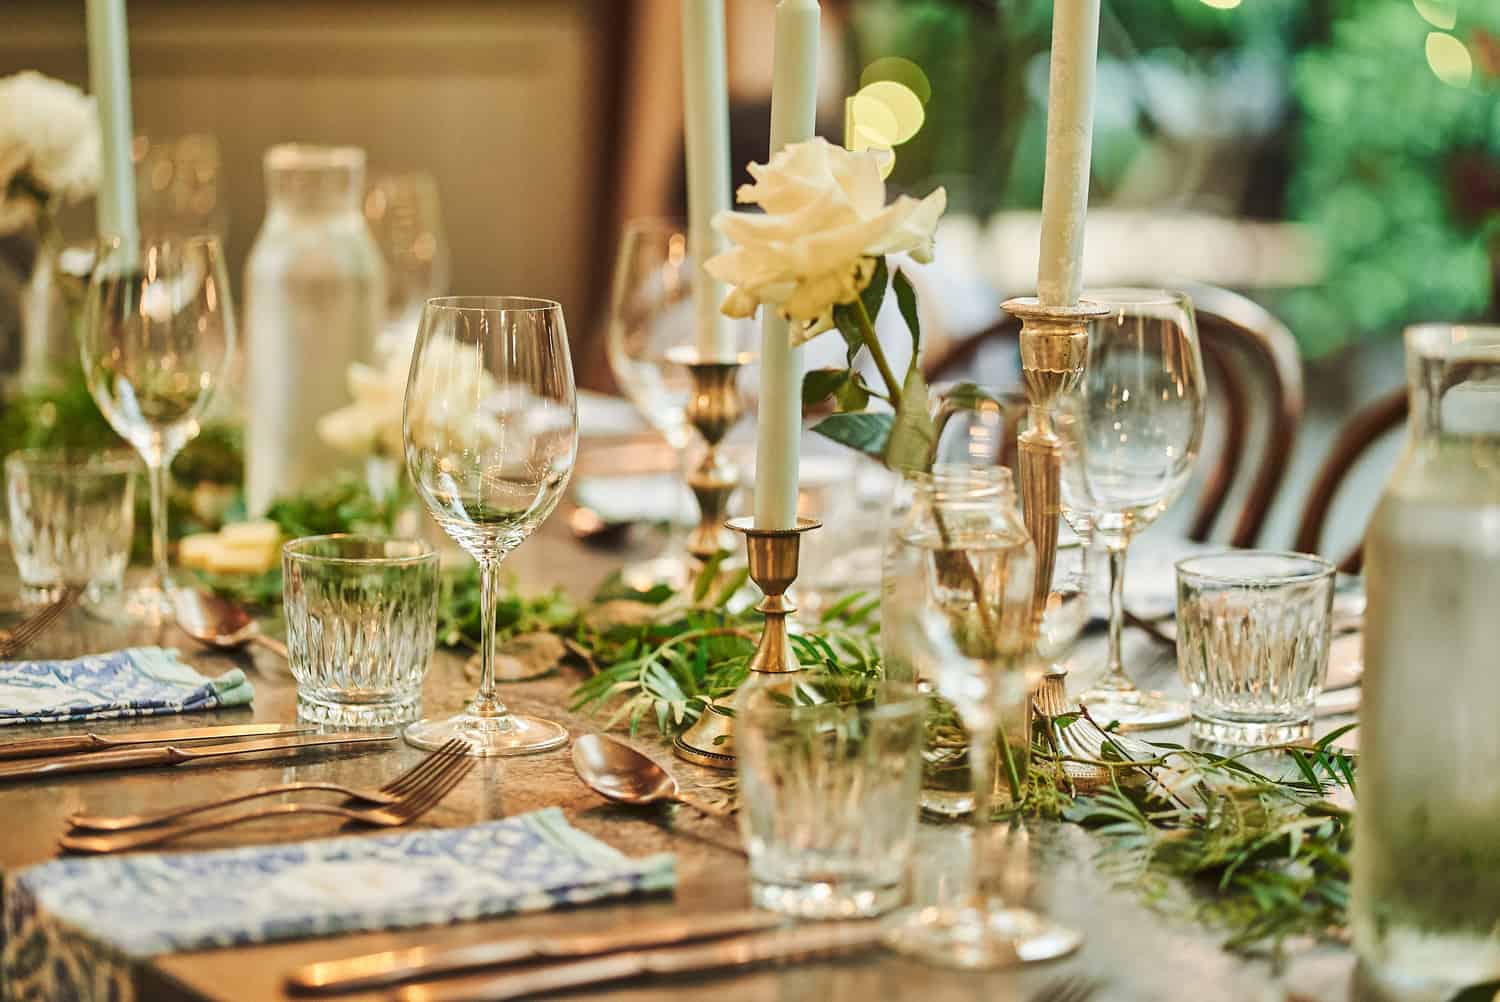 Banquet-Style Table